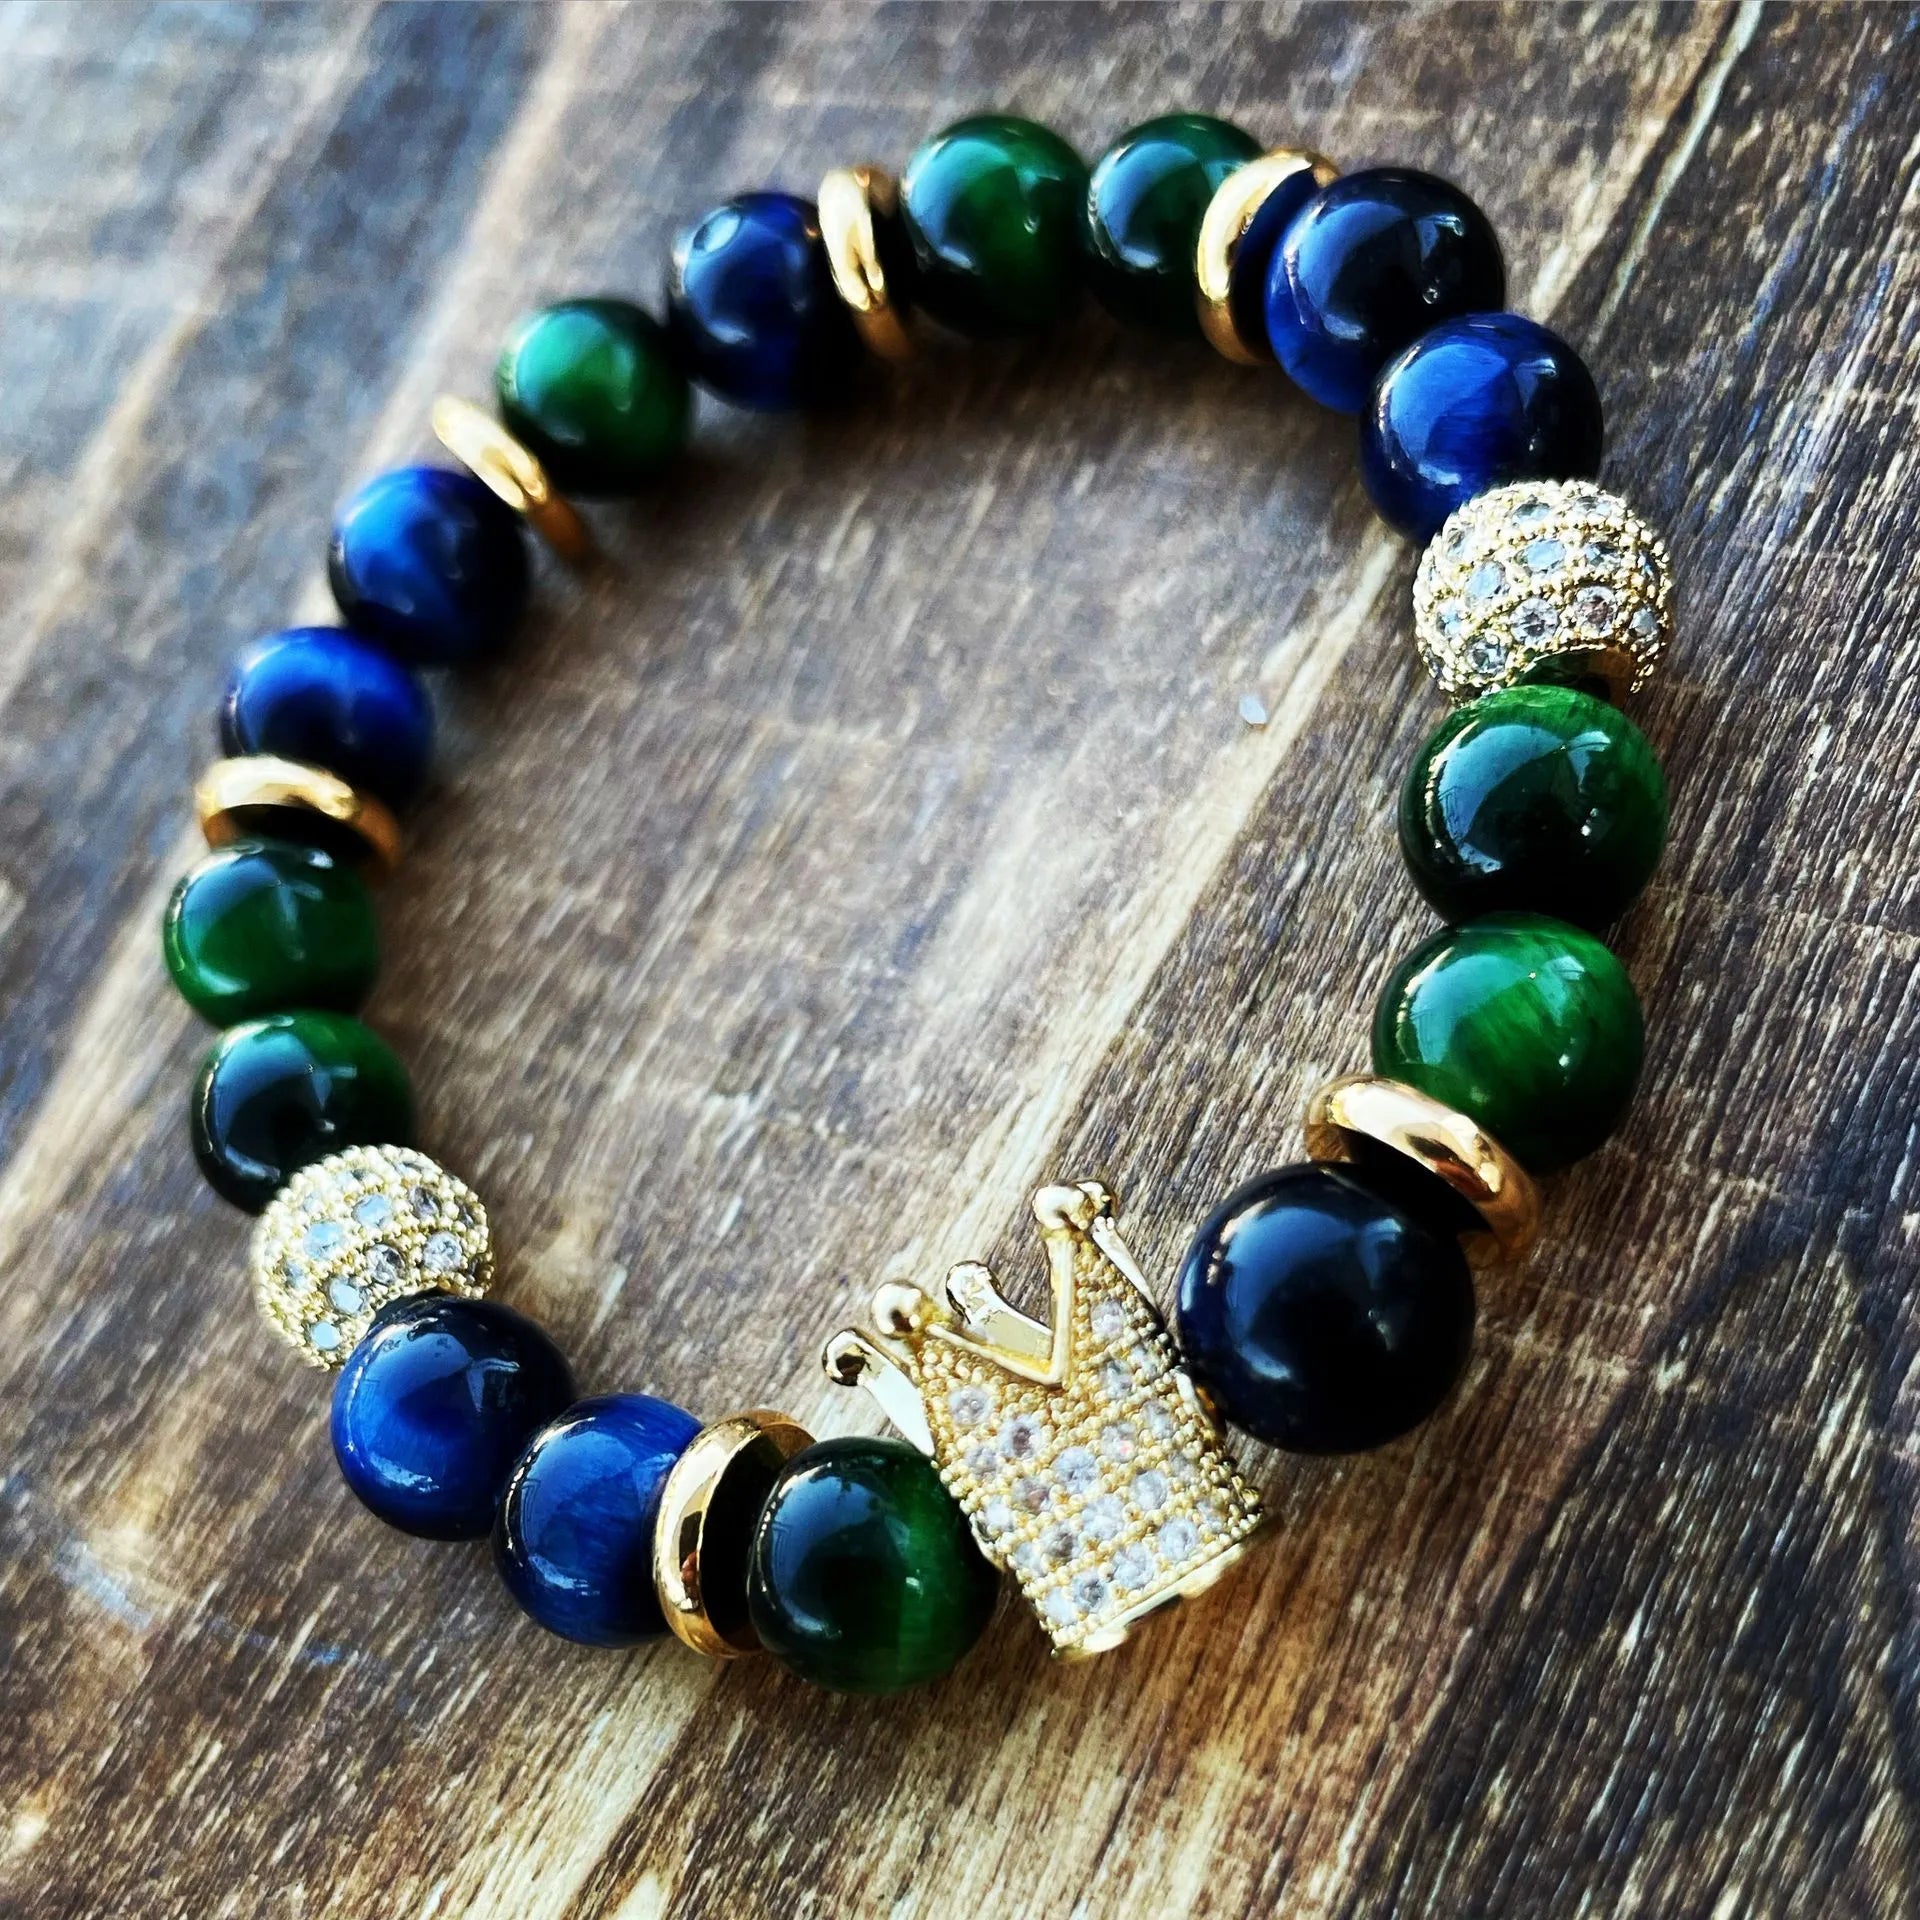 Green and Blue Tiger eye